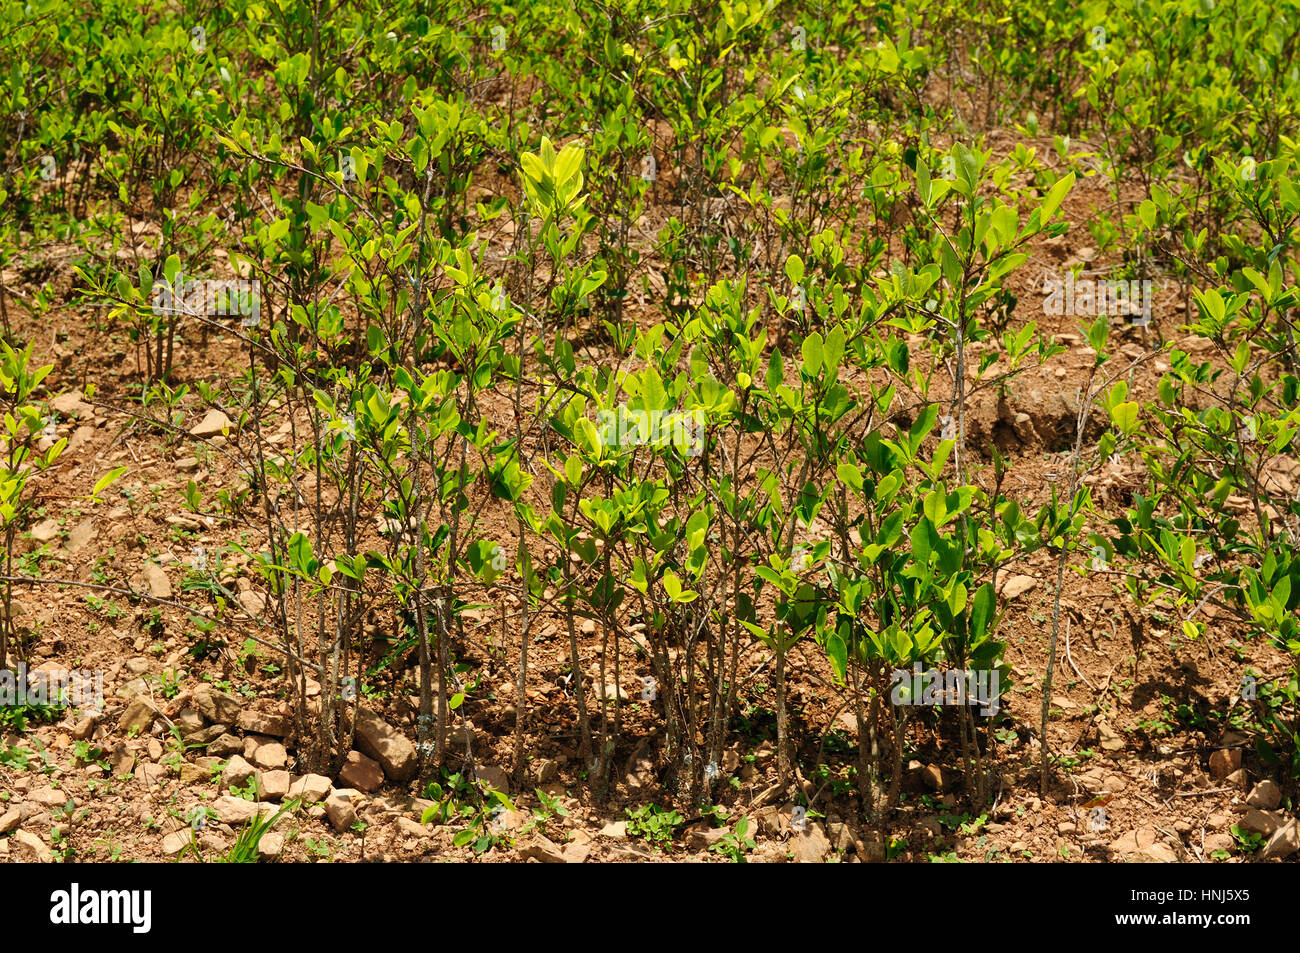 Bolivia, coca plants in the Andes Mountains near Coroico, The photo present close up of the coca leaves on the coca plantation. Stock Photo